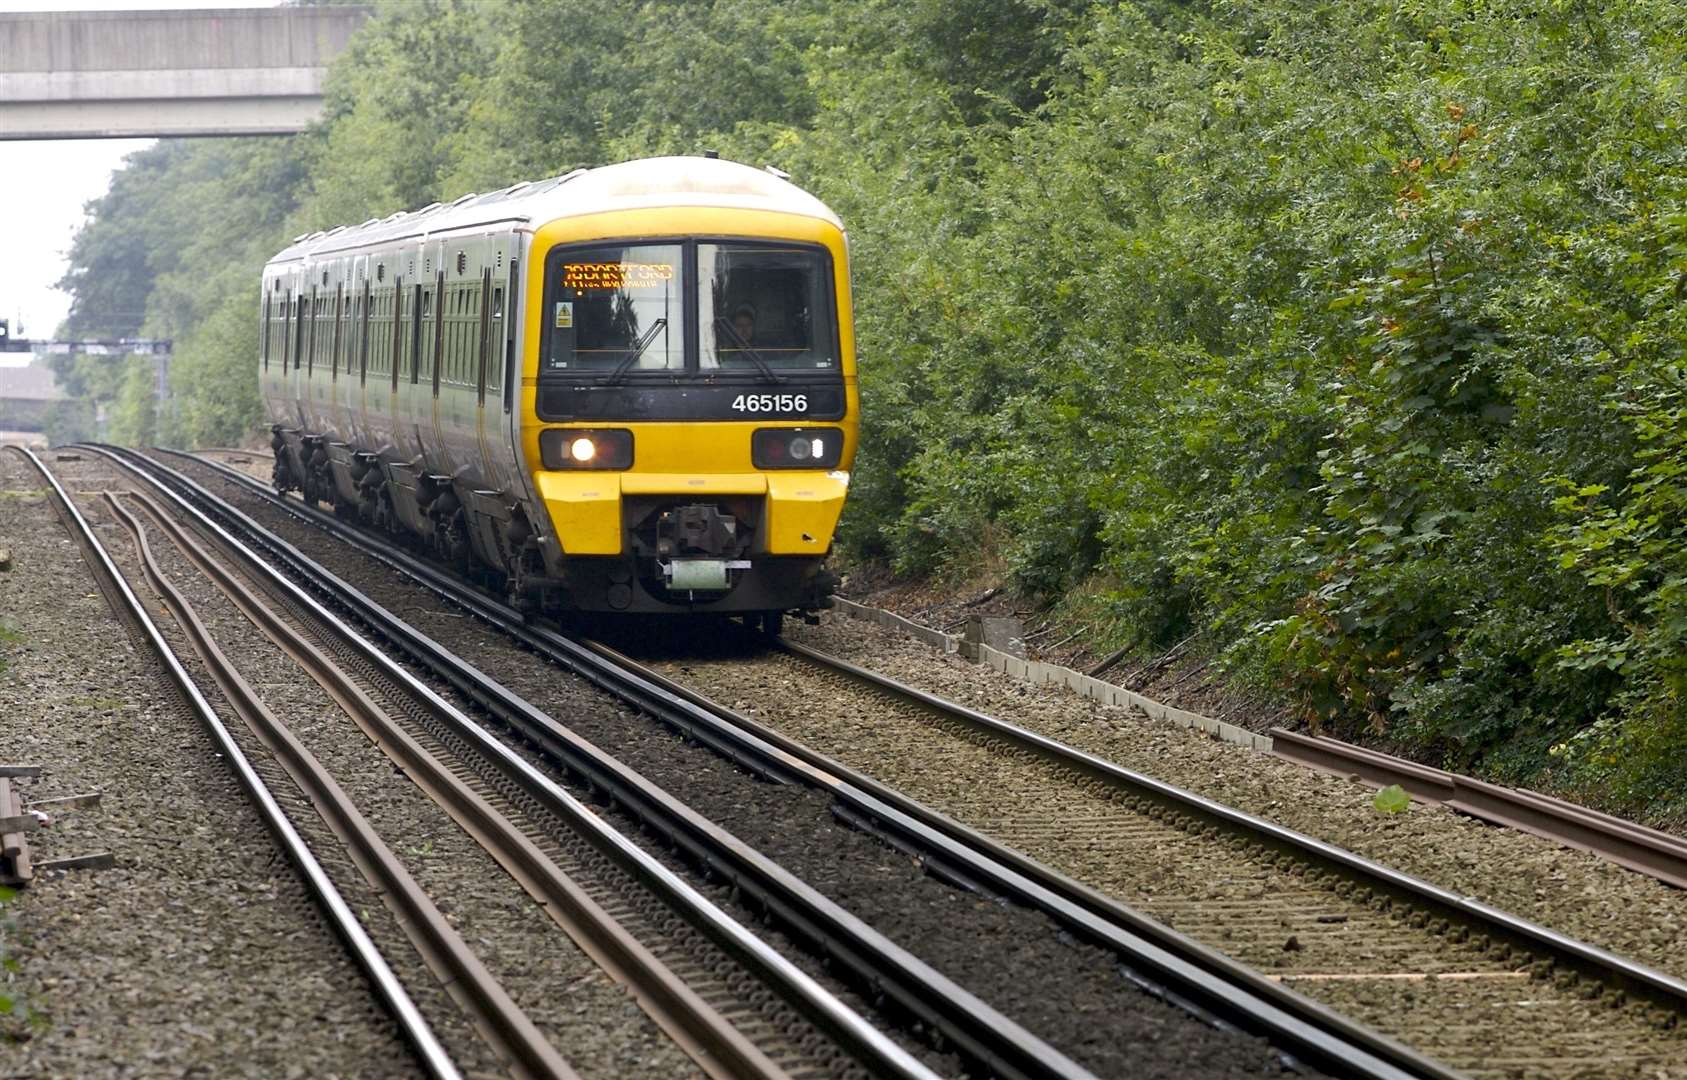 Trains were delayed after horses were spotted on the line near Kemsing